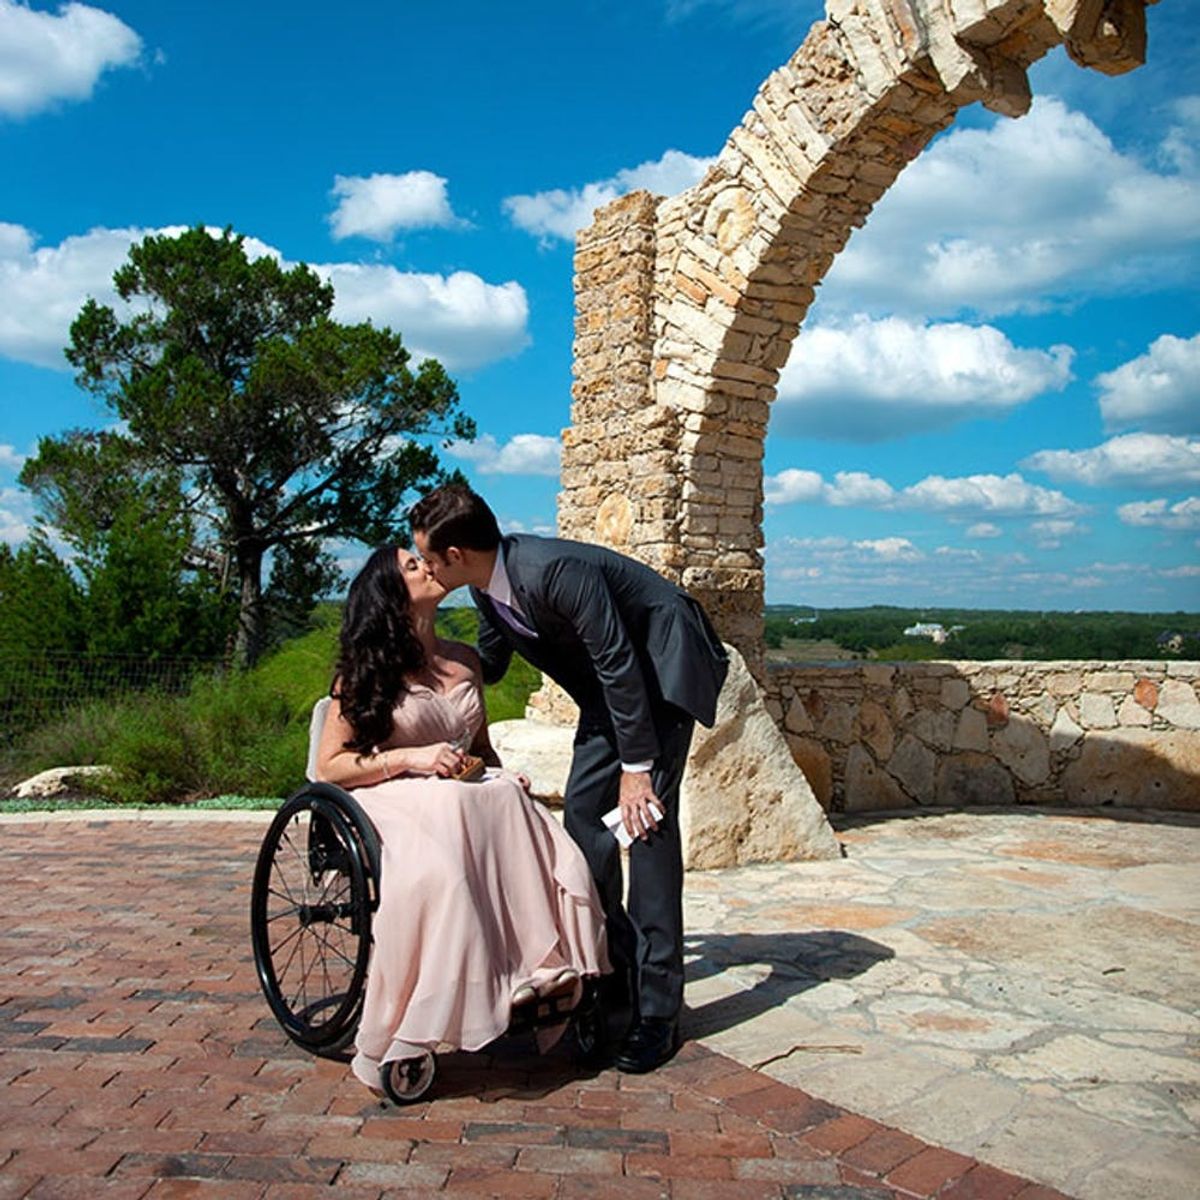 10 One-of-a-Kind Touches in This Inspiring Couple’s Wedding